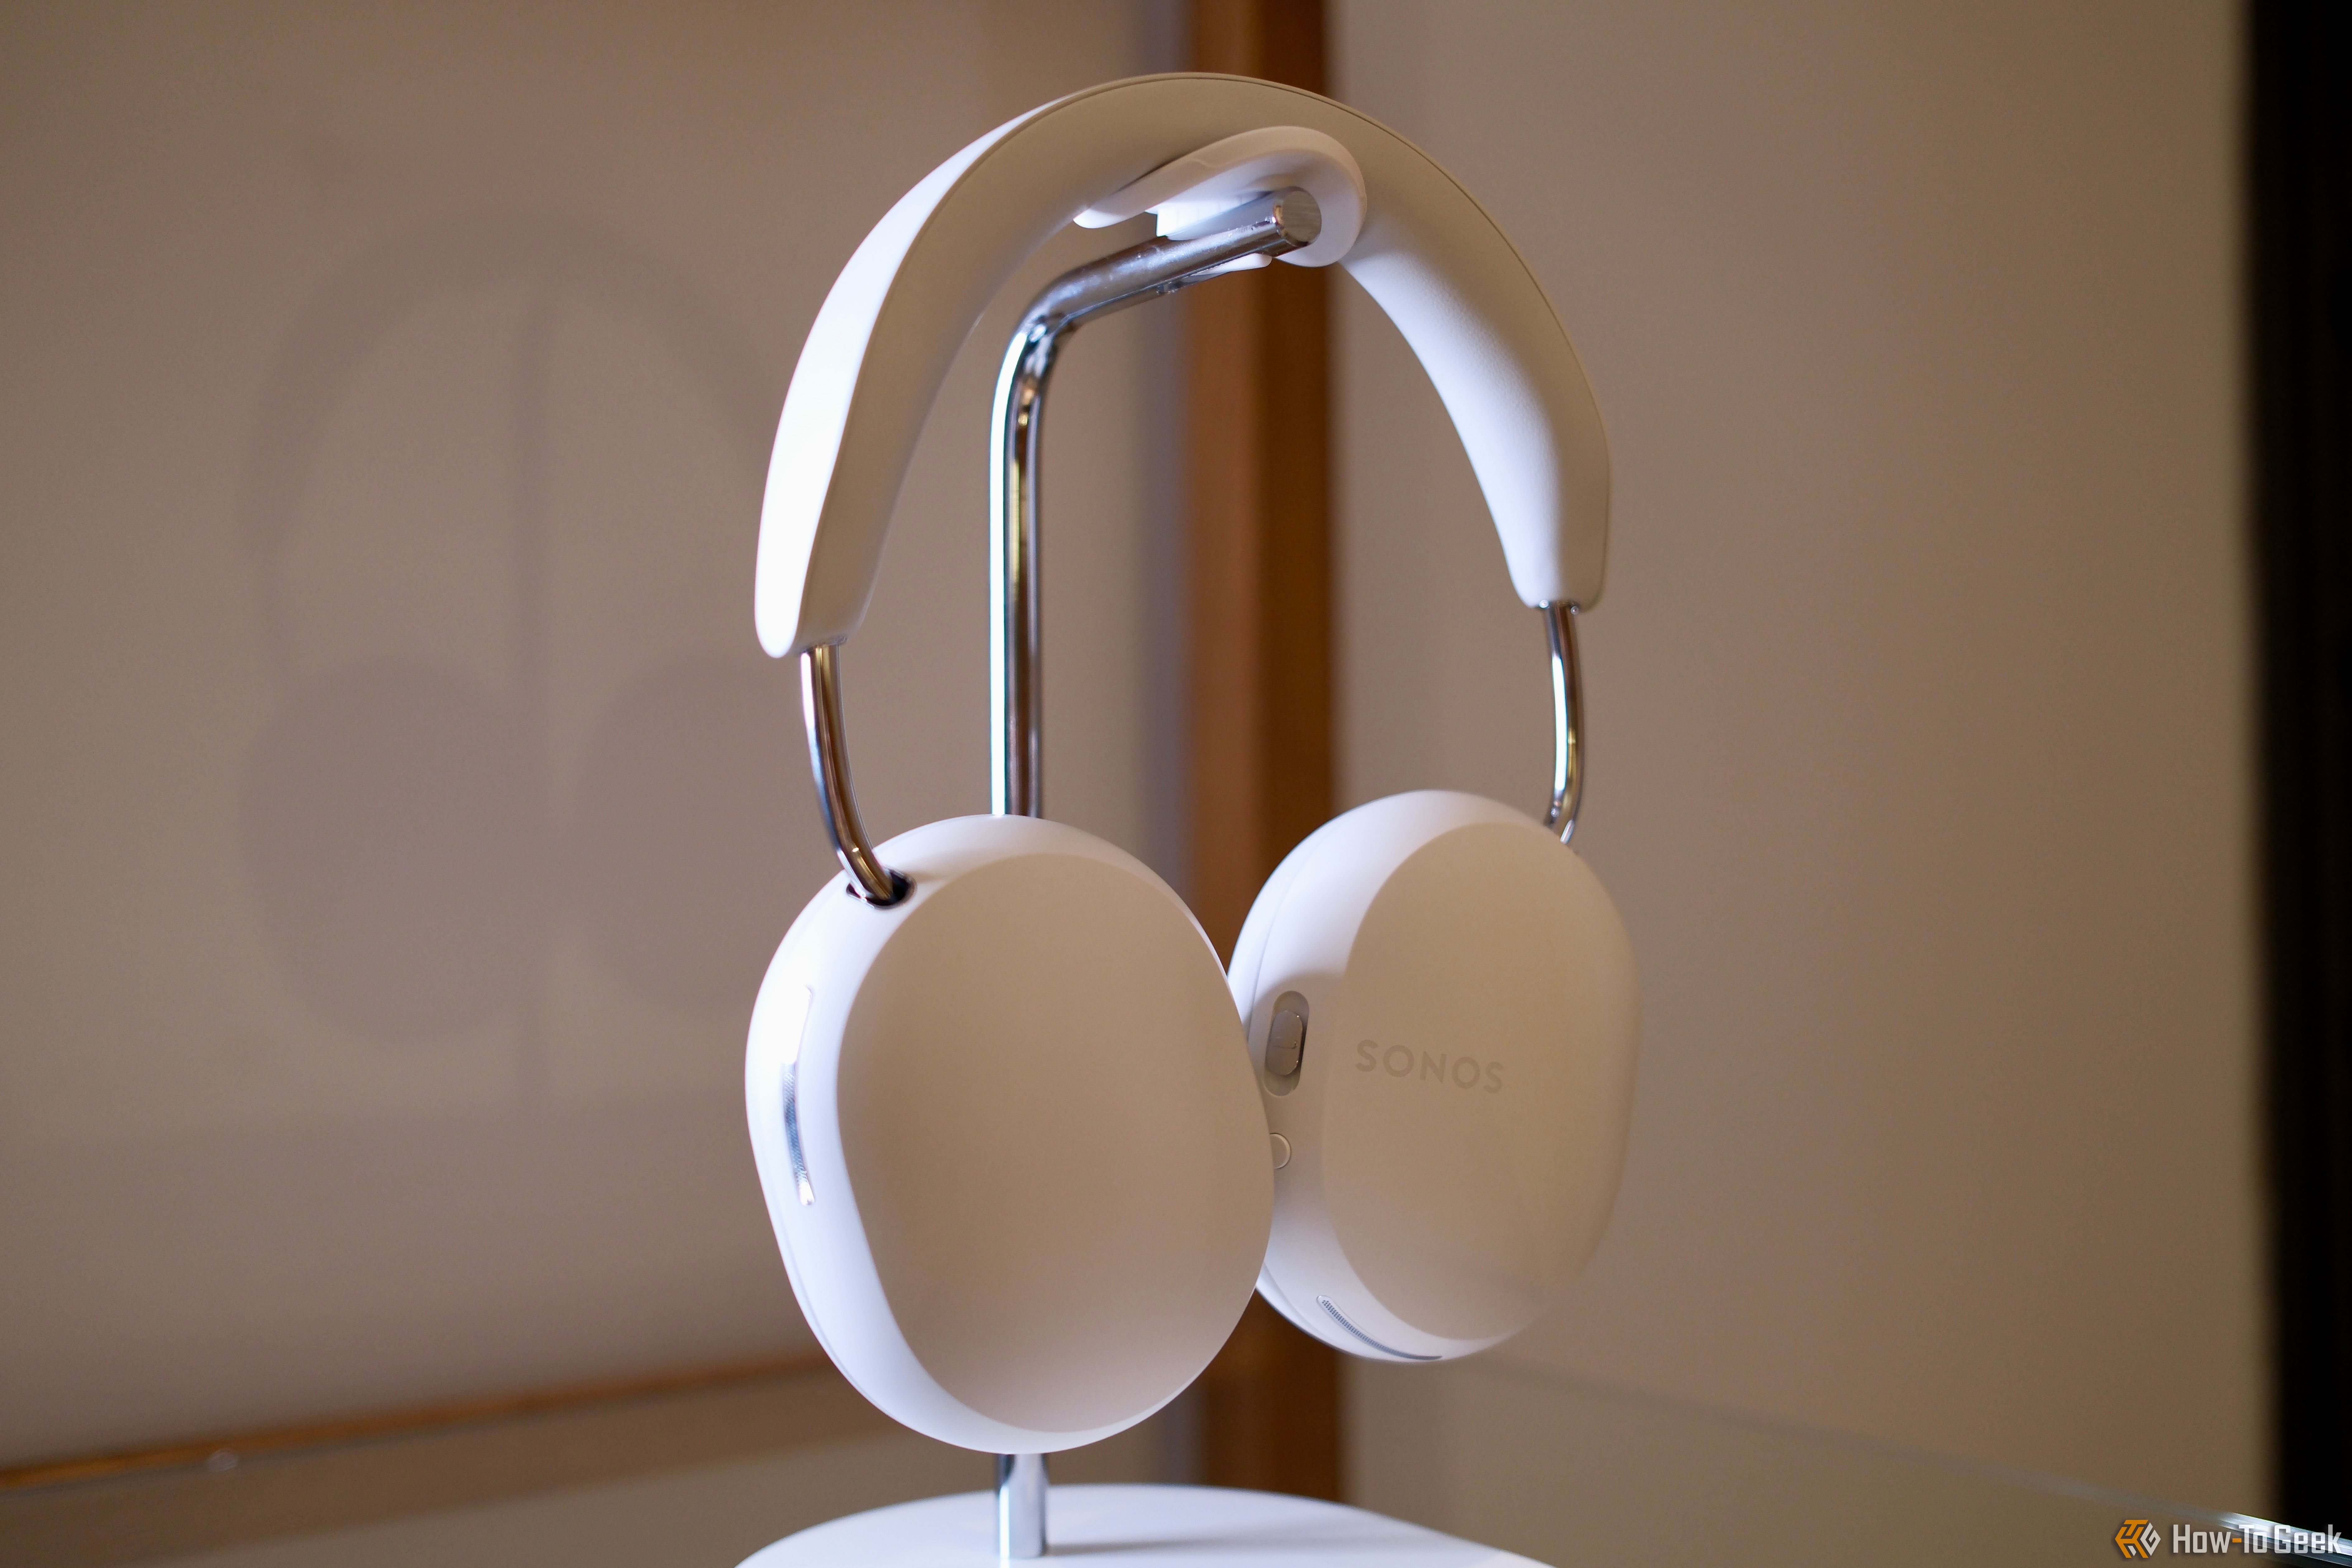 Sonos Ace headphones hanging on a stand